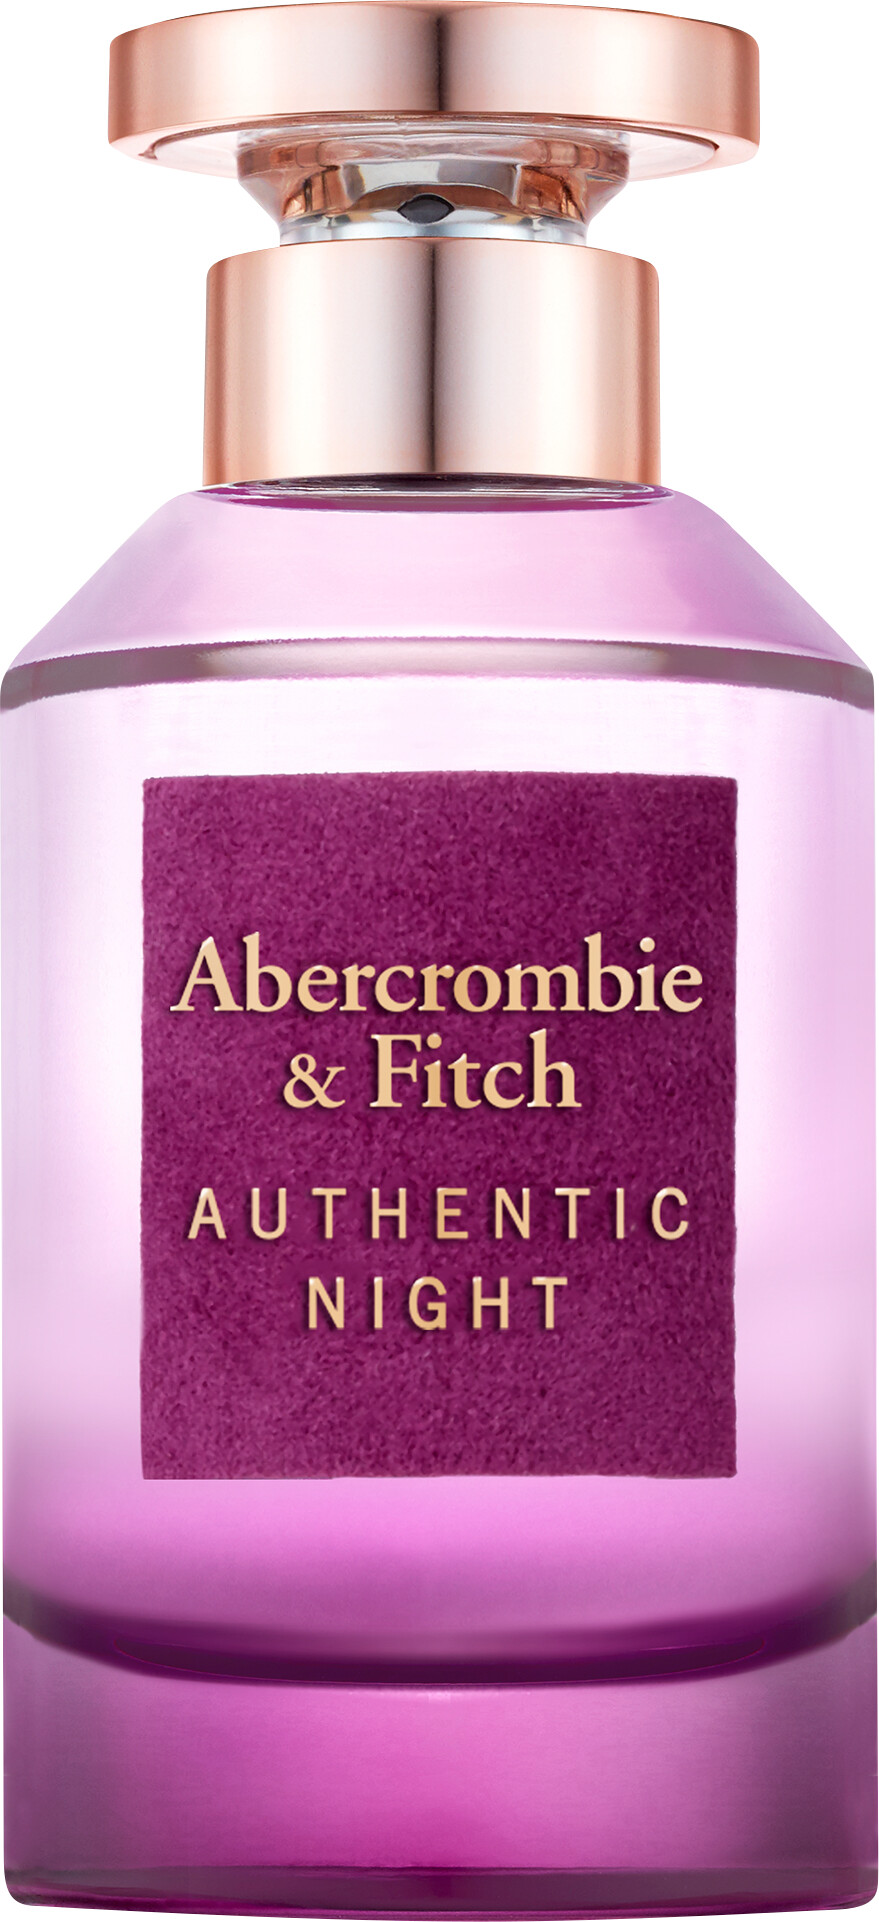 Abercrombie & Fitch Authentic Night For Women